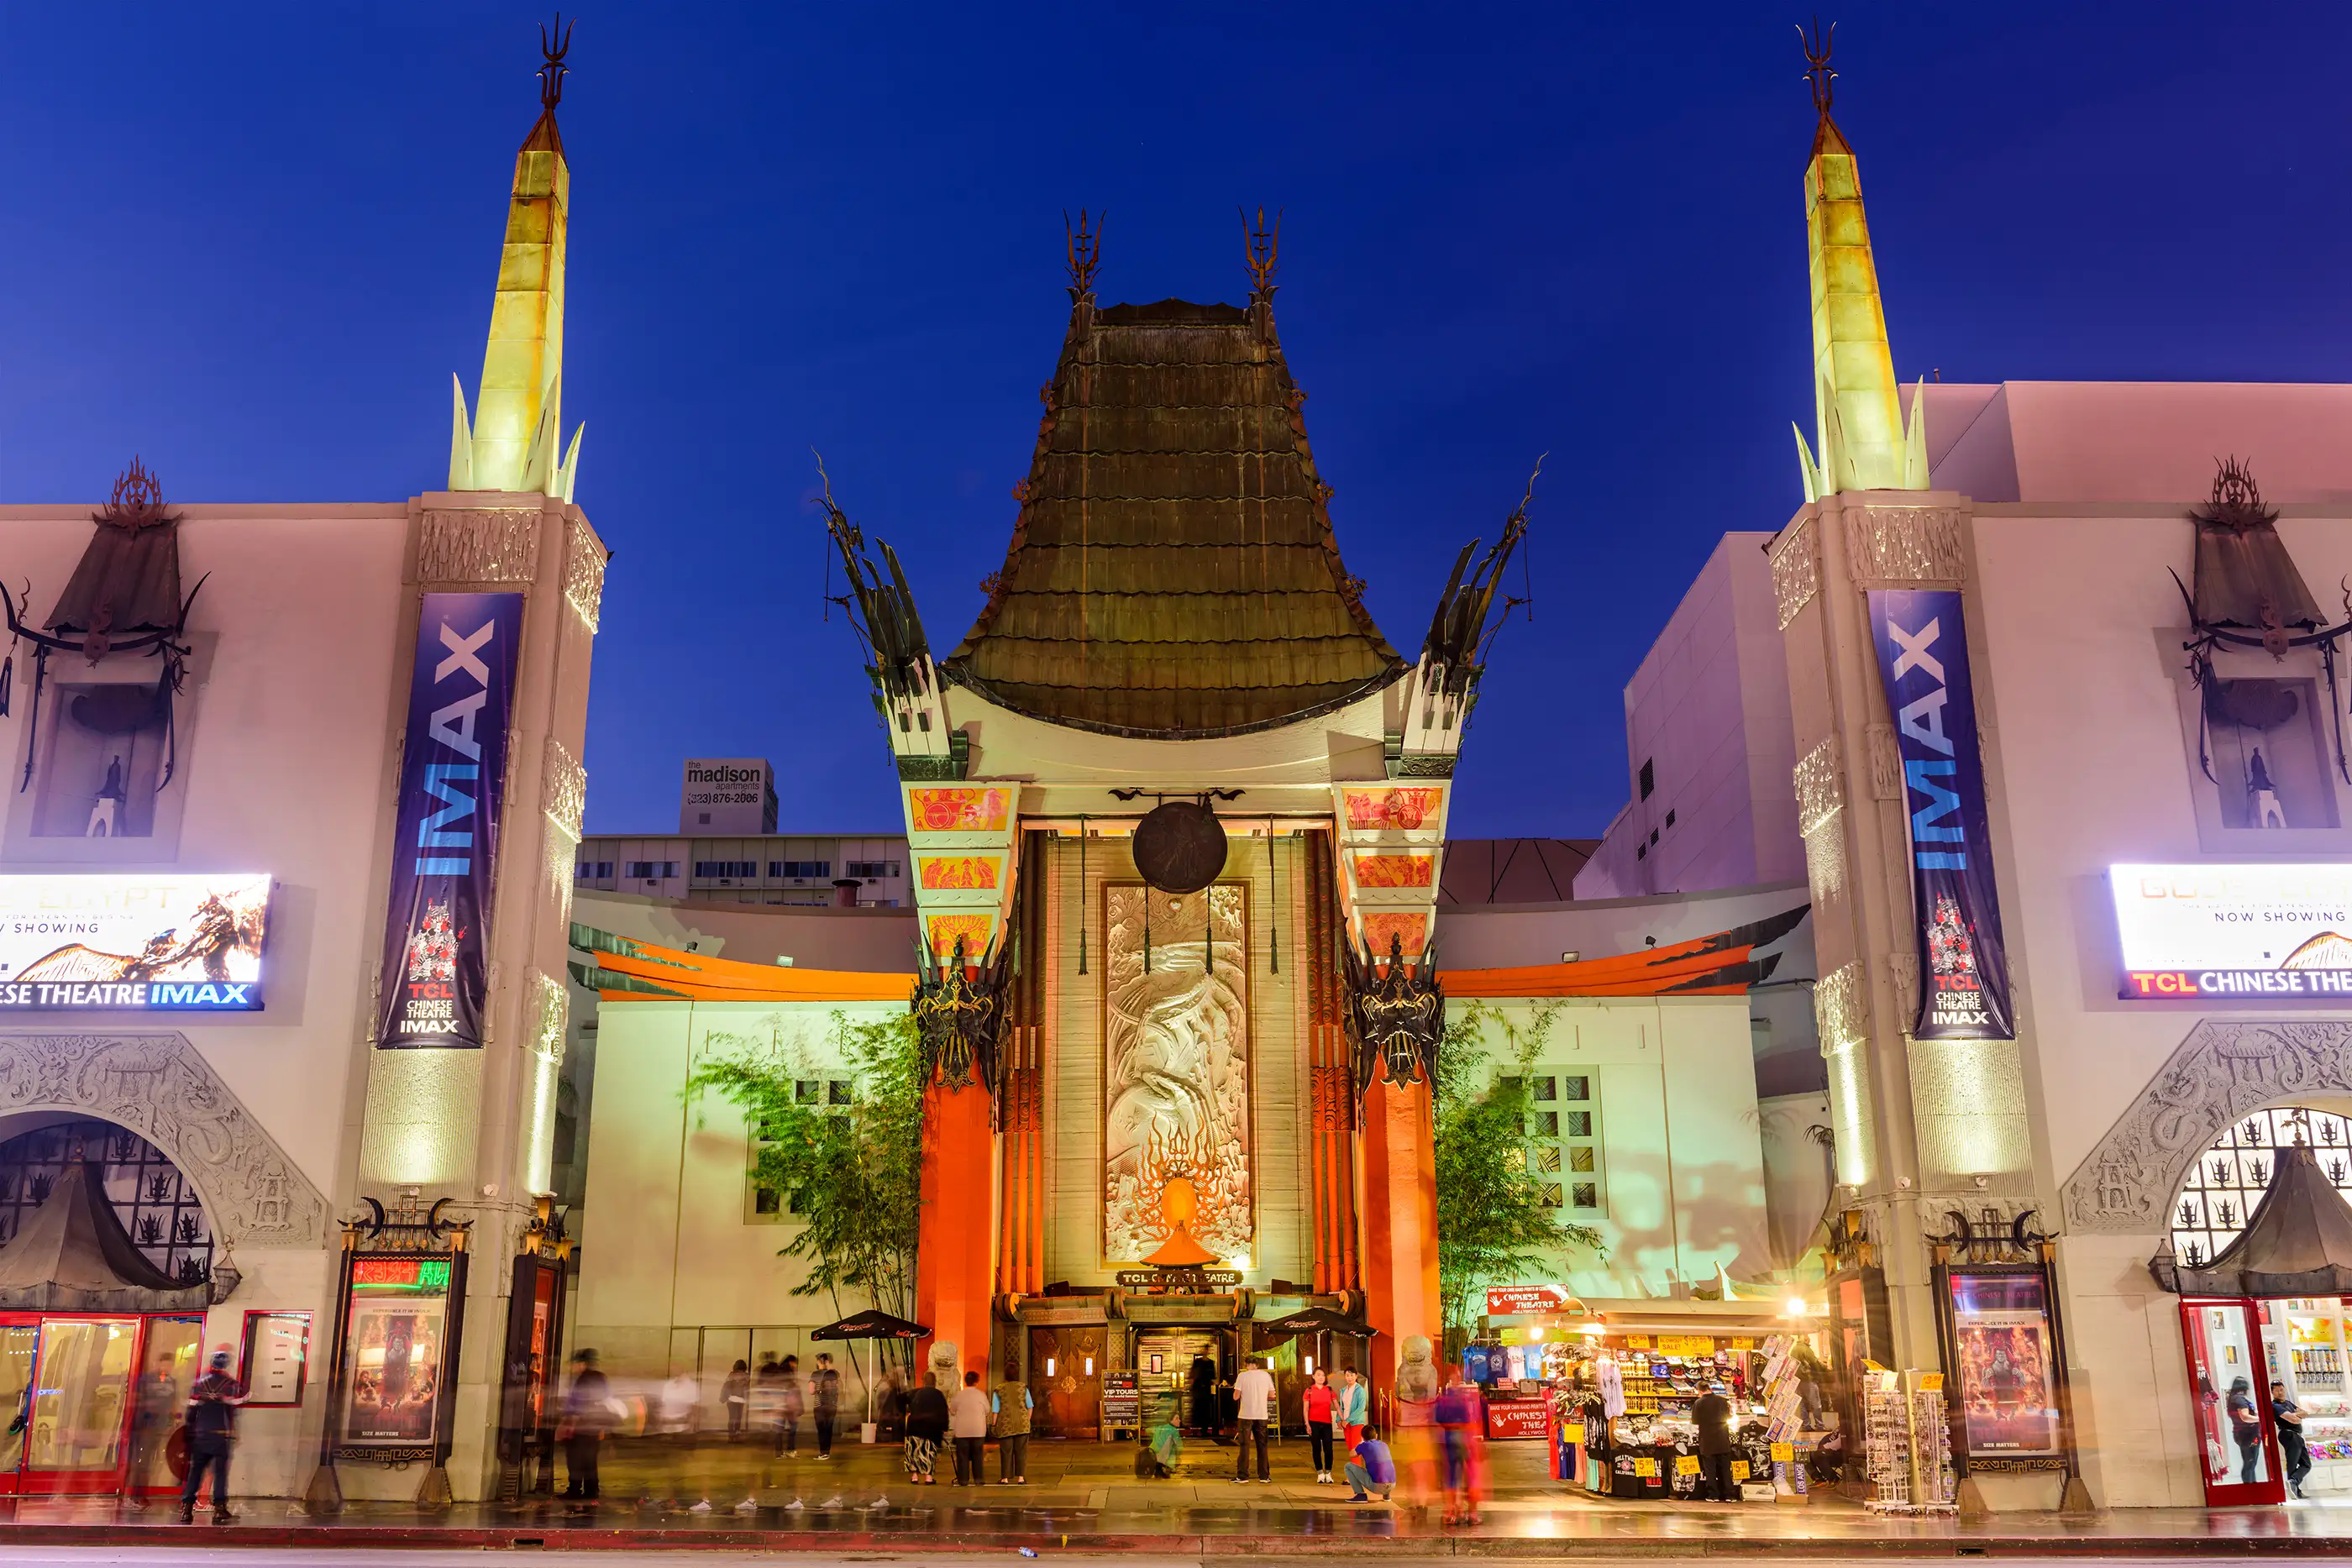 170815-route-66-graumans-chinese-theater-hollywood-boulevard